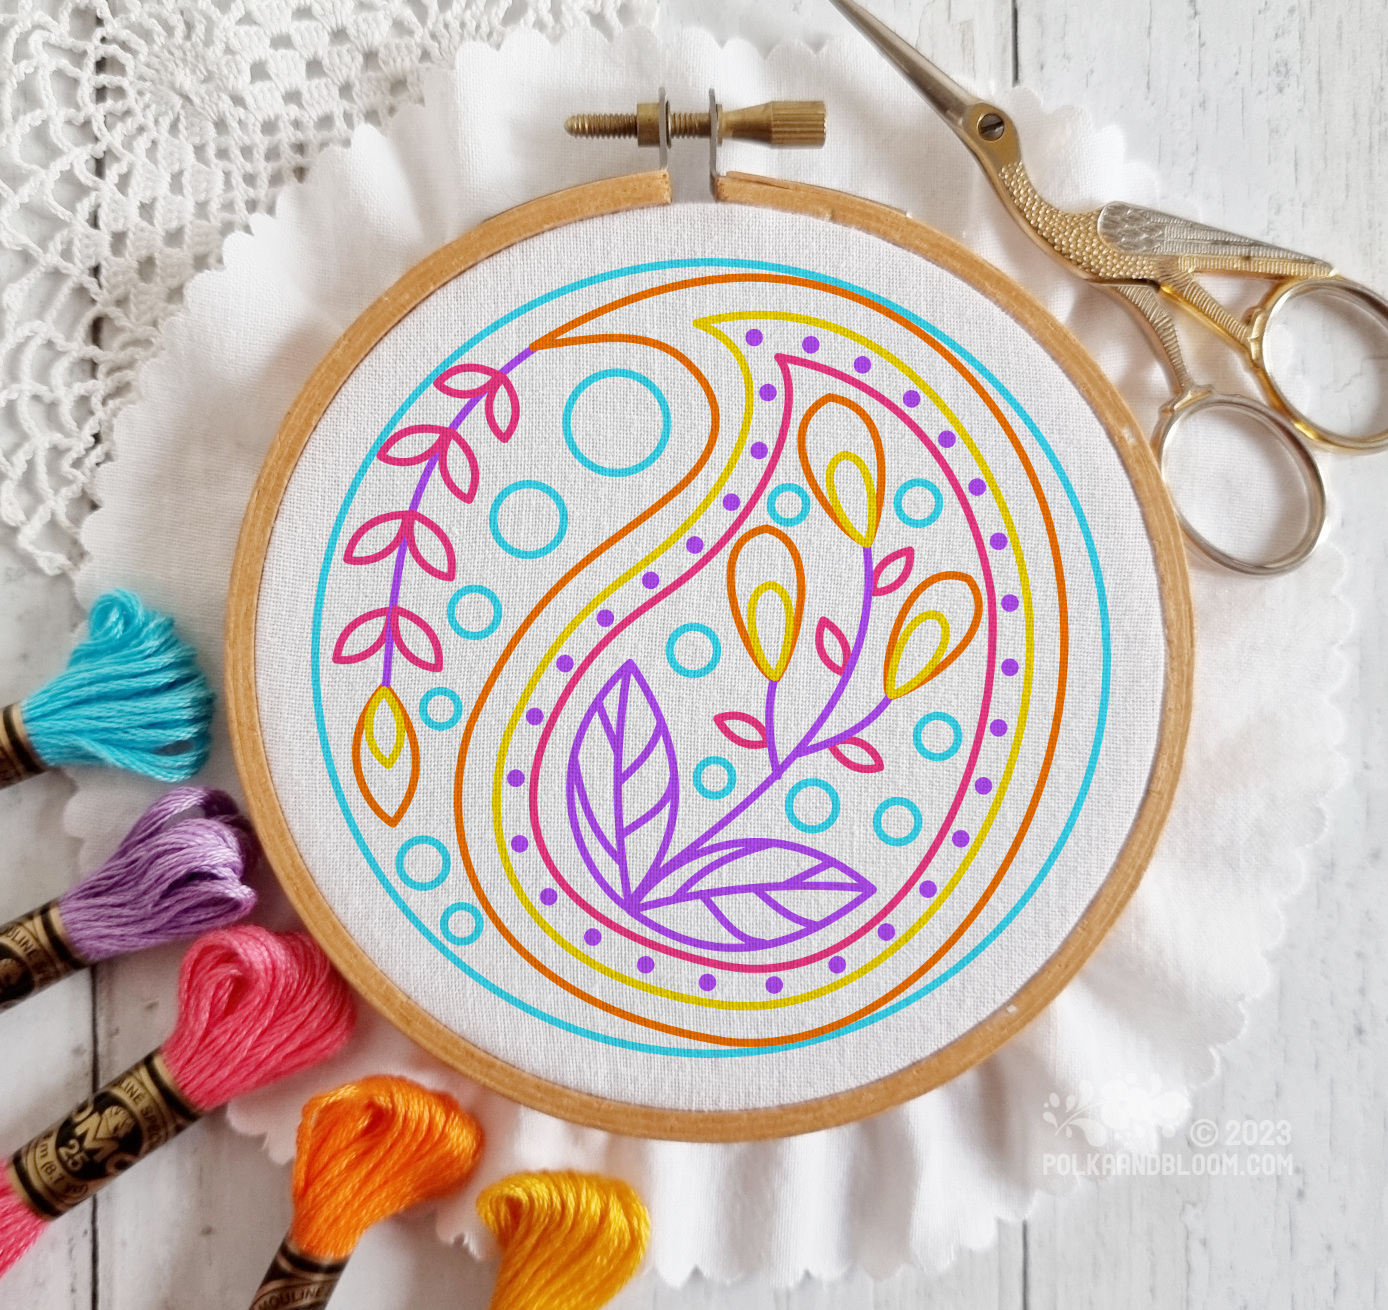 Small wooden embroidery hoop seen from above. There is white fabric in the hoop and the image is overlaid with a line drawing of a paisley design in blue, yellow and purple.